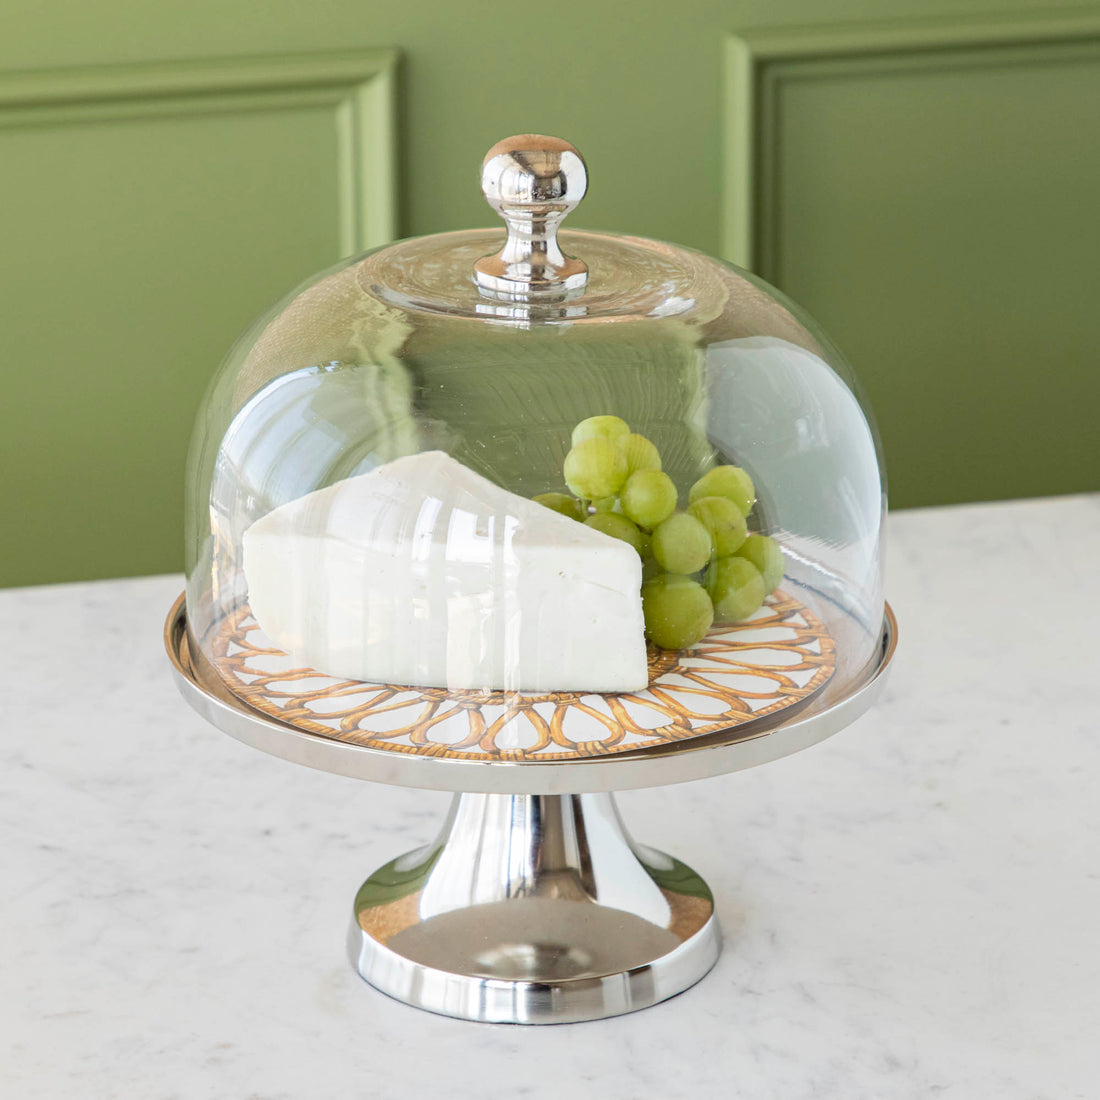 Aluminum serving stand with glass dome on white background